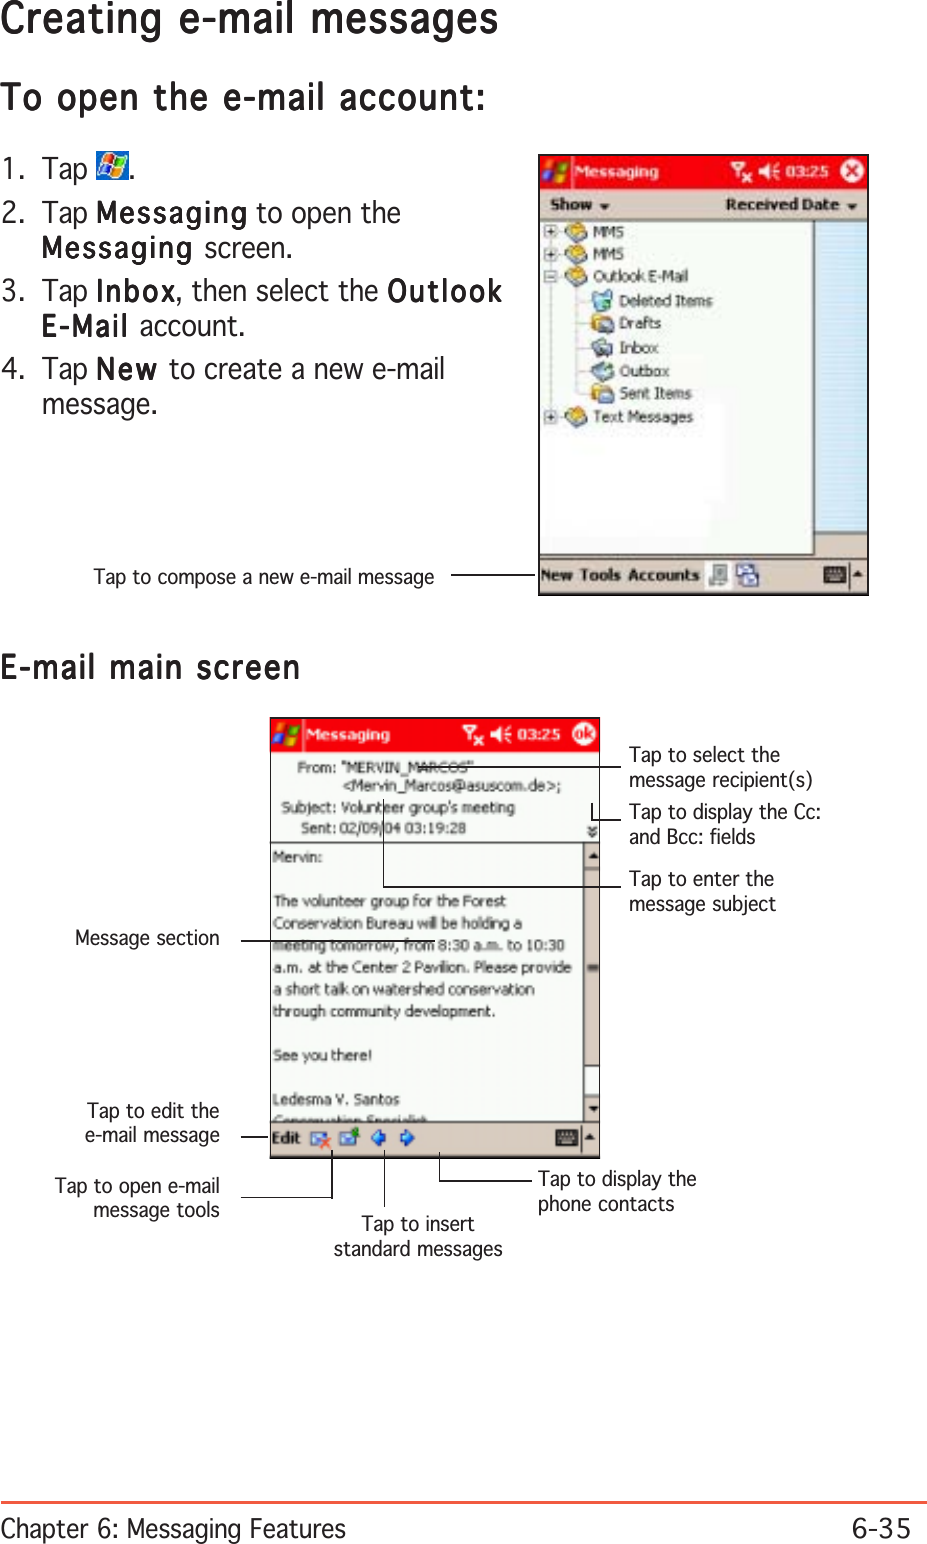 Chapter 6: Messaging Features6-35Tap to compose a new e-mail messageCreating e-mail messagesCreating e-mail messagesCreating e-mail messagesCreating e-mail messagesCreating e-mail messagesTo open the e-mail account:To open the e-mail account:To open the e-mail account:To open the e-mail account:To open the e-mail account:1. Tap  .2. Tap MessagingMessagingMessagingMessagingMess aging to open theMessagingMessagingMessagingMessagingMessaging screen.3. Tap InboxInboxInboxInboxInb ox, then select the OutlookOutlookOutlookOutlookOutlookE-MailE-MailE-MailE-MailE-Mail account.4. Tap NewNewNewNewN e w  to create a new e-mailmessage.E-mail main screenE-mail main screenE-mail main screenE-mail main screenE-mail main screenTap to edit thee-mail messageTap to open e-mailmessage tools Tap to insertstandard messagesTap to display thephone contactsTap to select themessage recipient(s)Tap to enter themessage subjectTap to display the Cc:and Bcc: fieldsMessage section